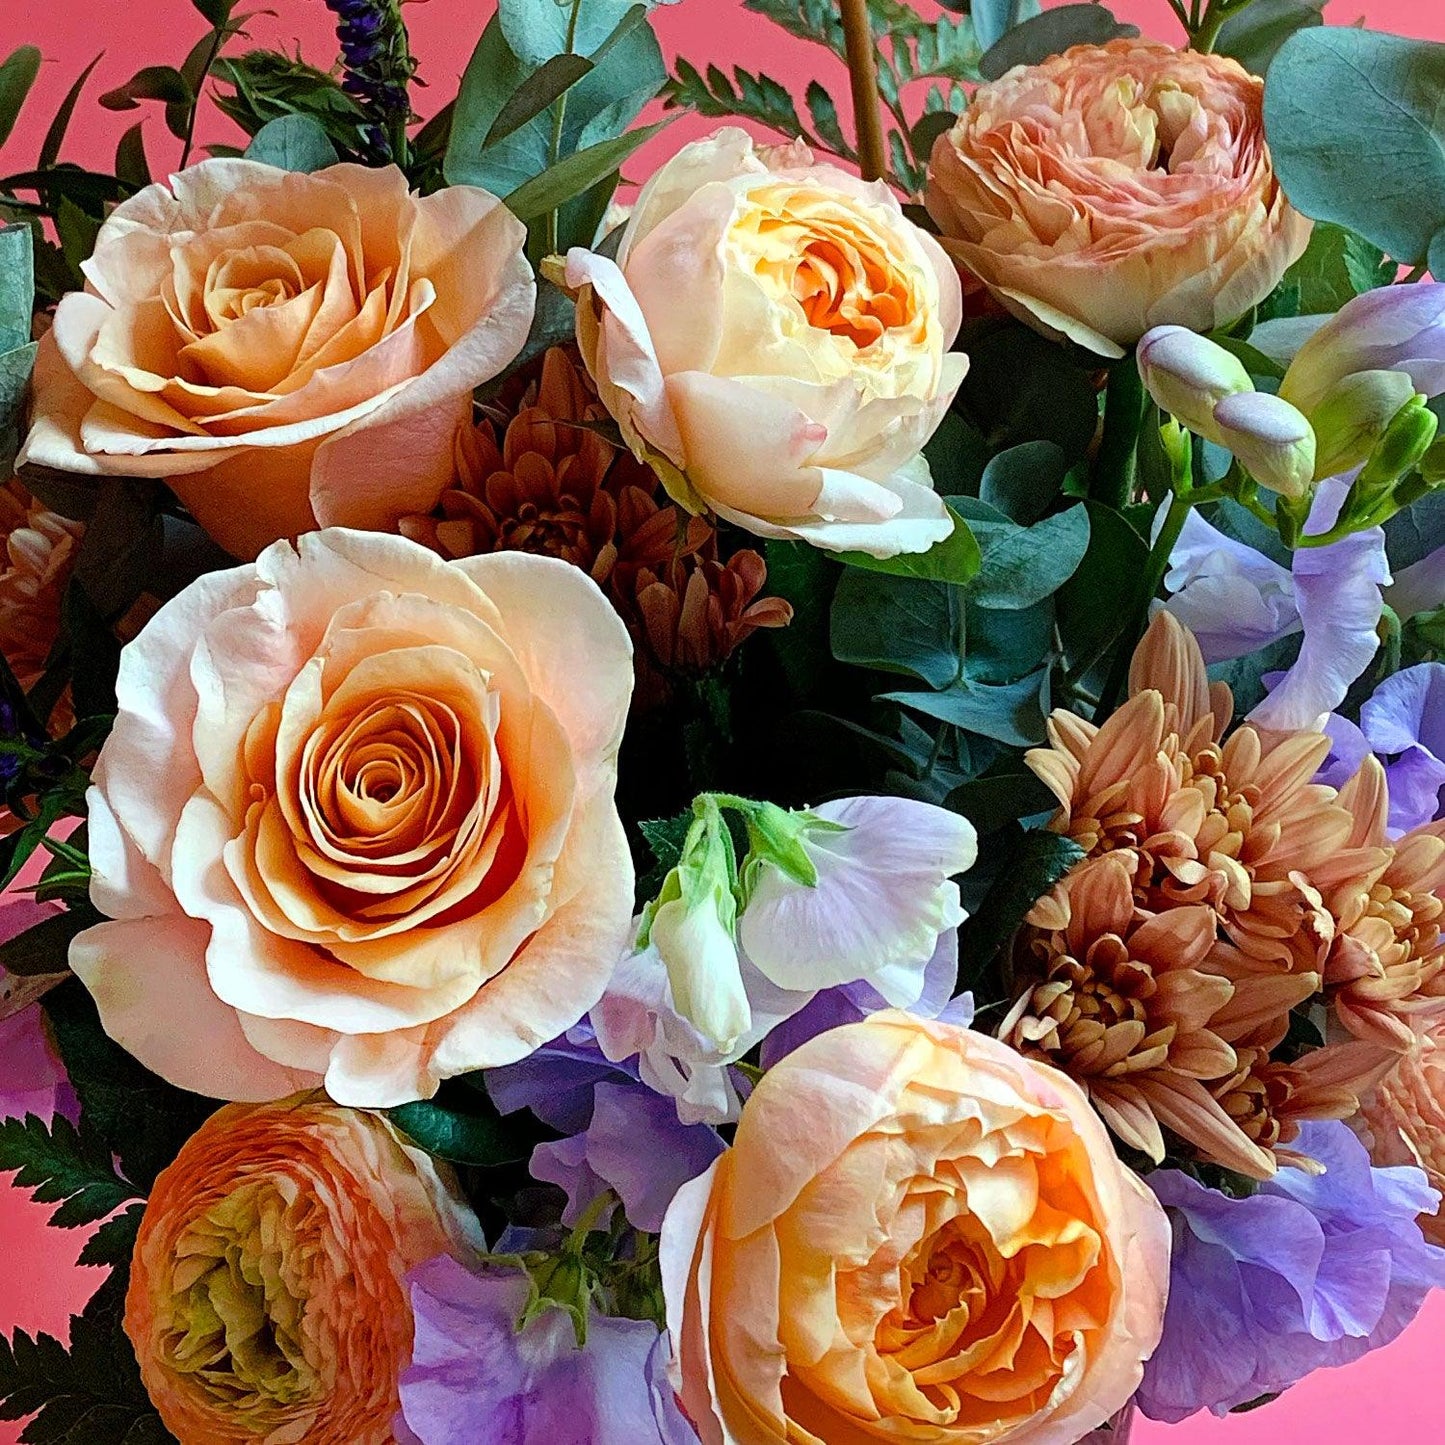 Close-up image of a bouquet with sweet peach and apricot tones, deepening to lavender and blue, with a touch of foliage for freshness. Order online for same-day flower delivery from Toronto's best florist, available near you.